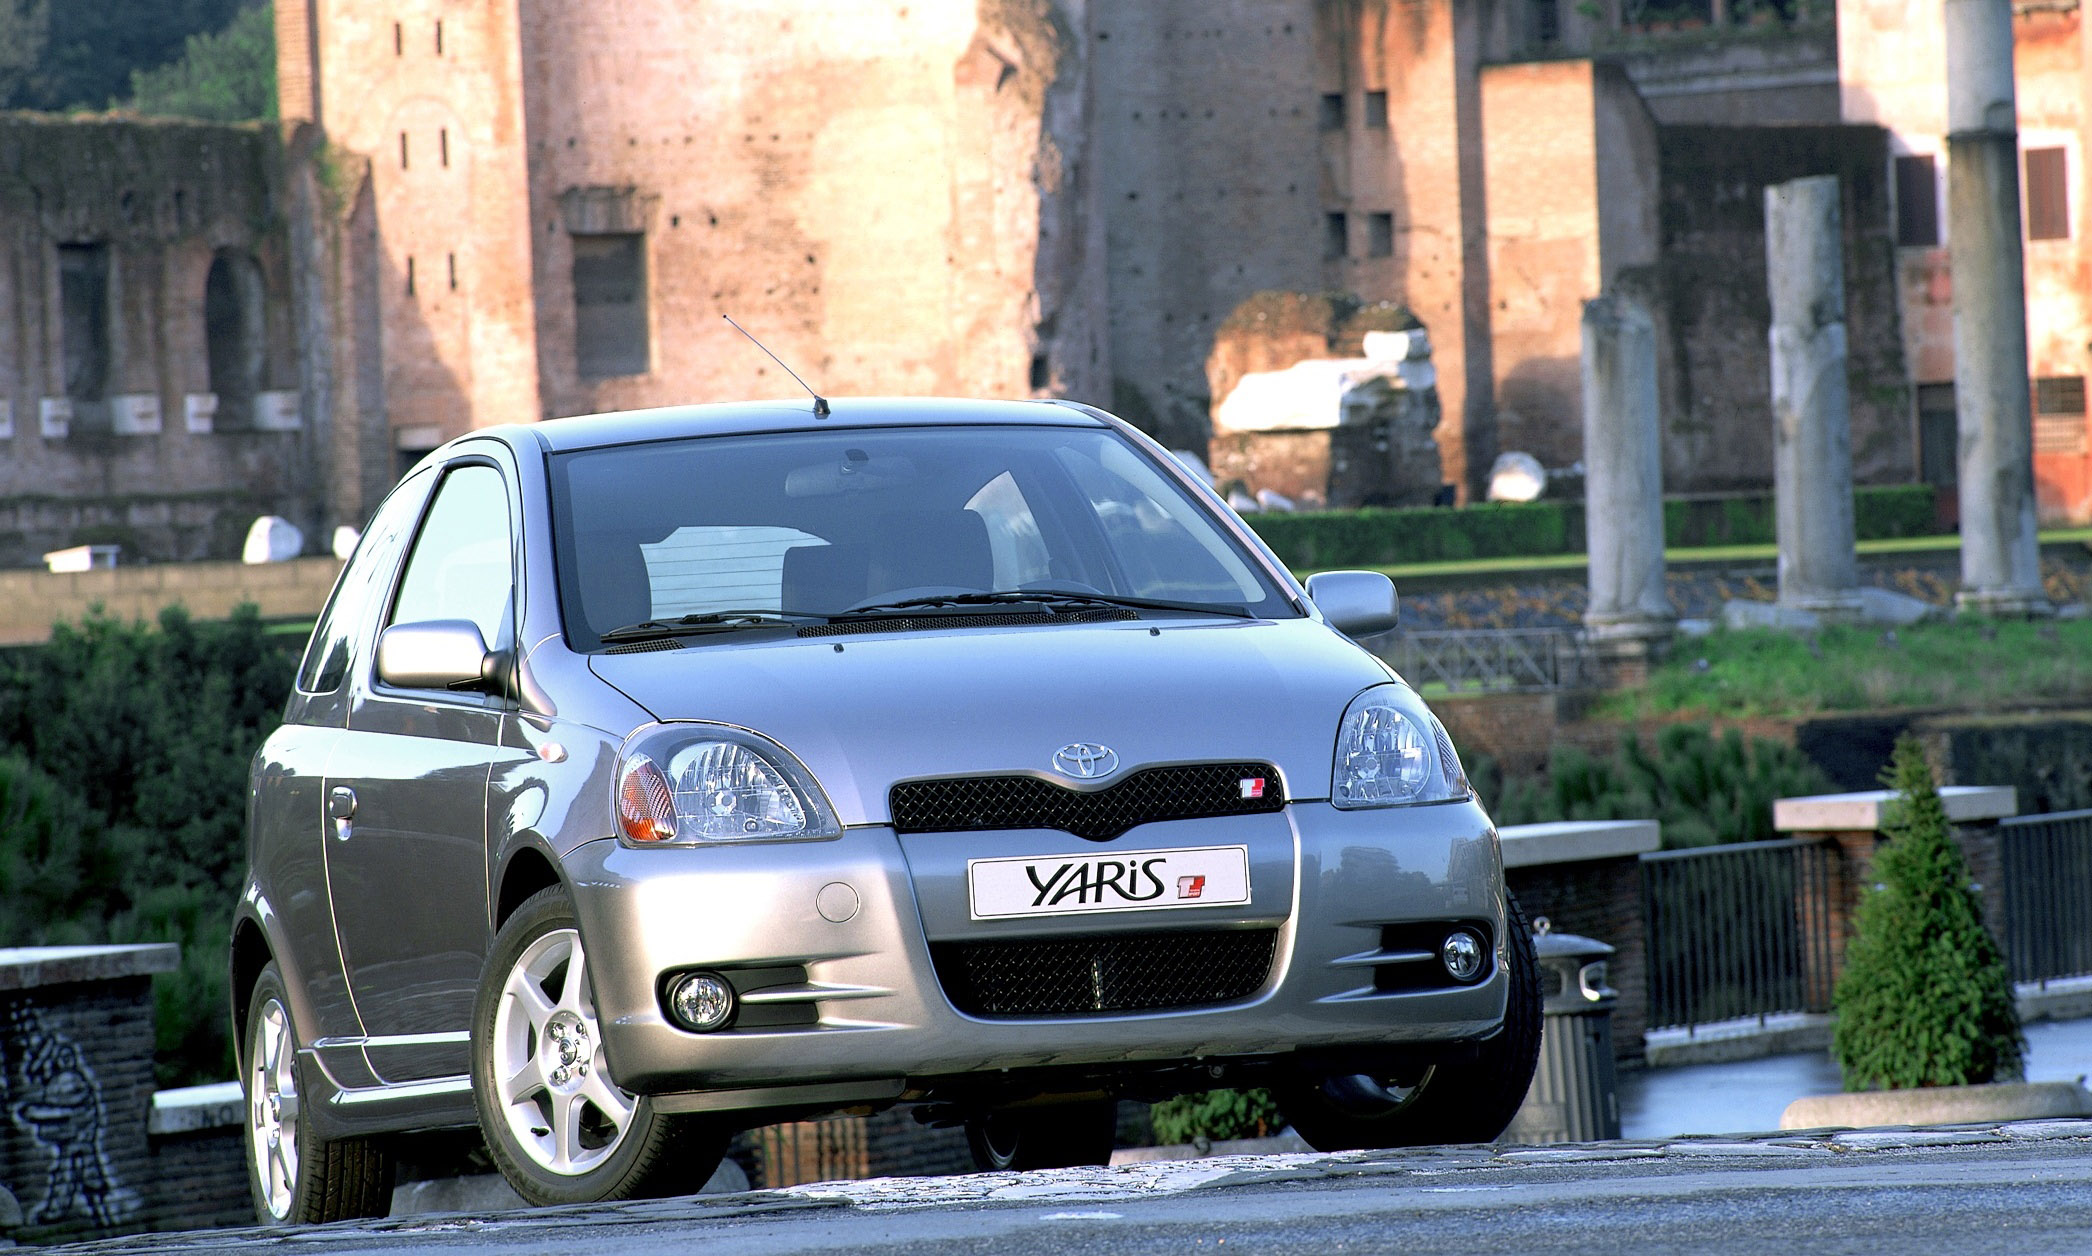 Toyota Yaris T Sport 2001 Picture 10 Of 13